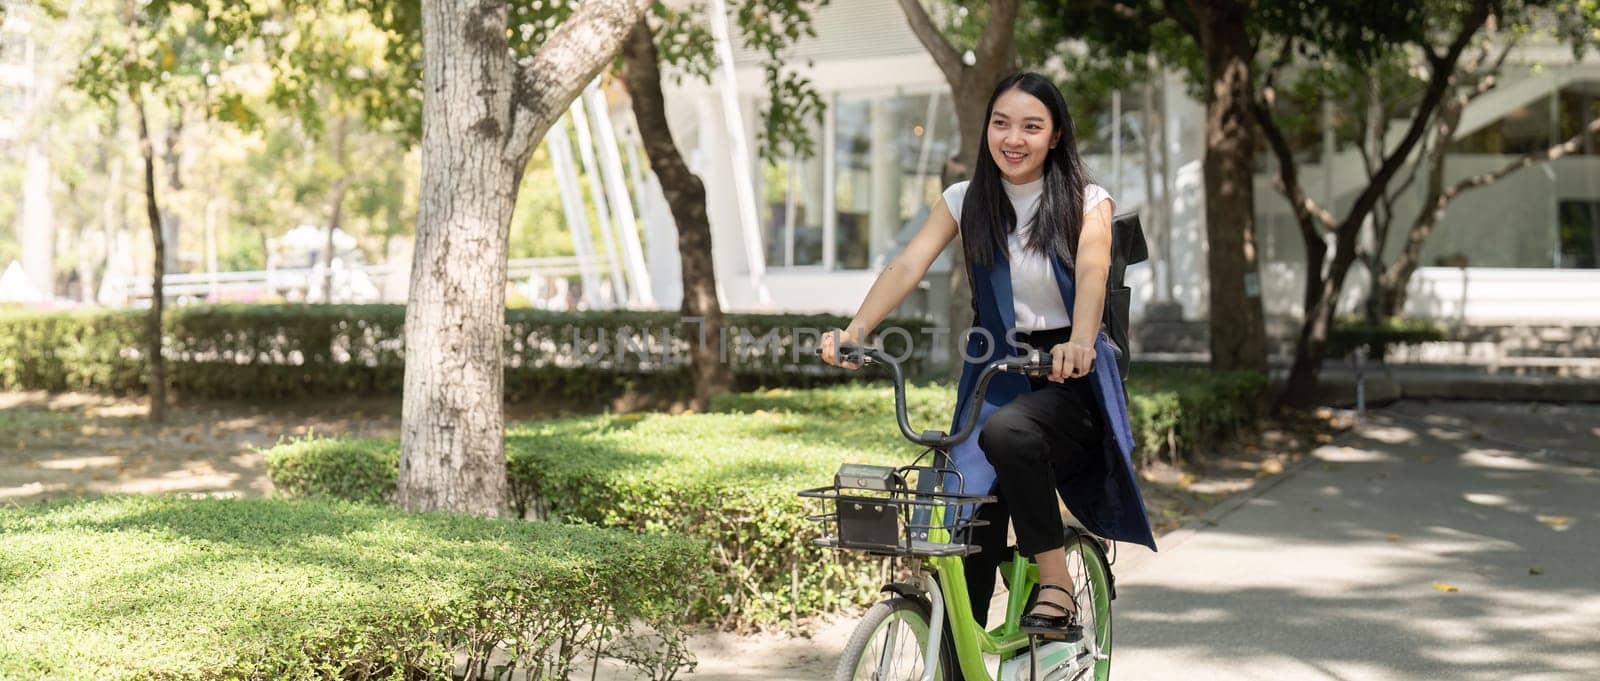 Smiling Asian woman rides a bicycle through a park on a sunny day, promoting eco-friendly transportation